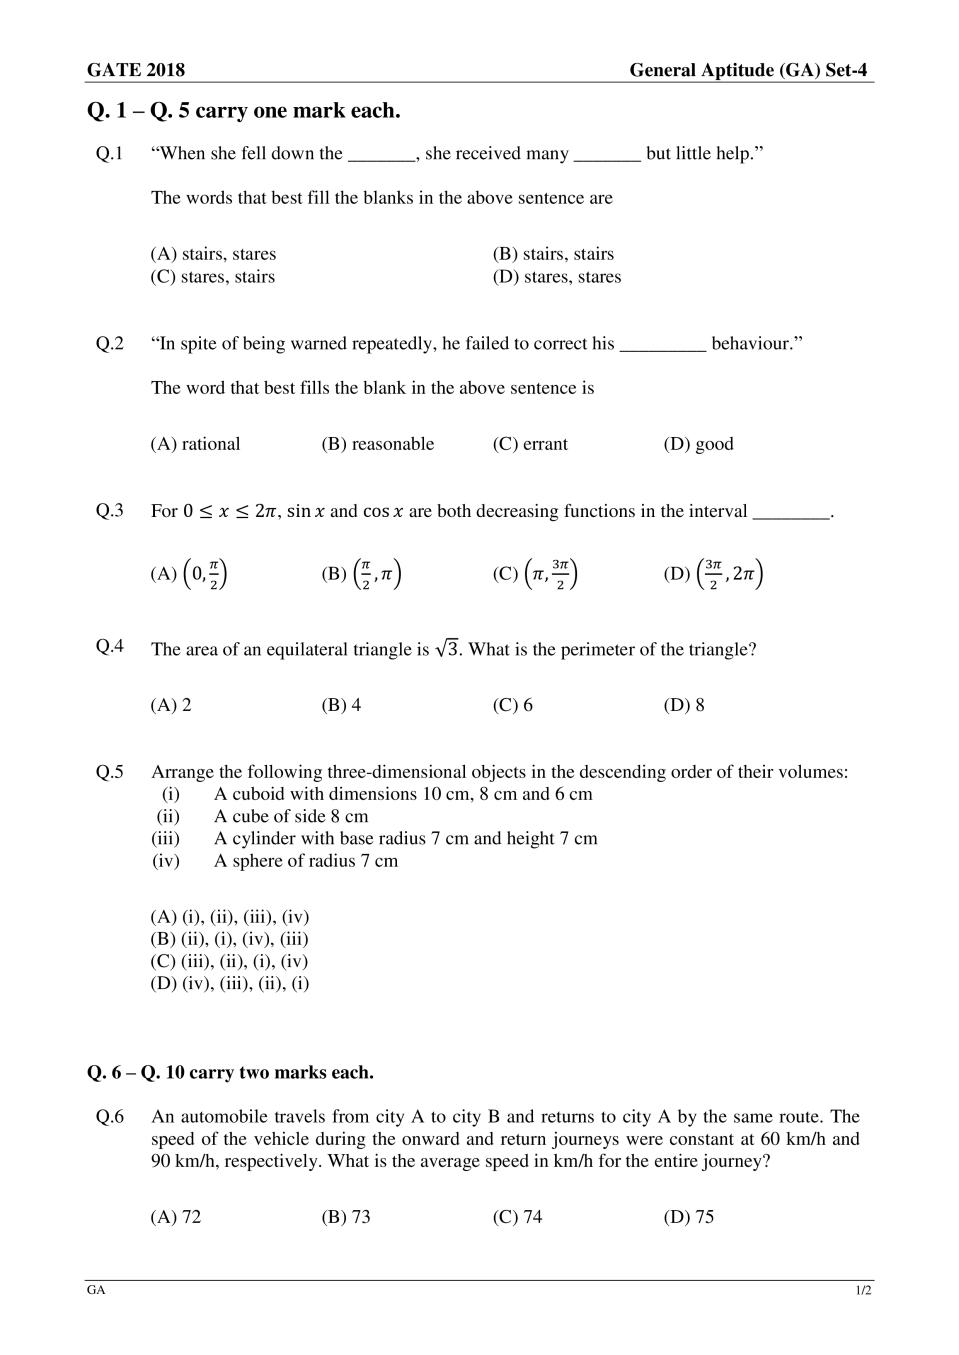 GATE 2018 Architecture and Planning (AR) Question Paper with Answer - Page 1